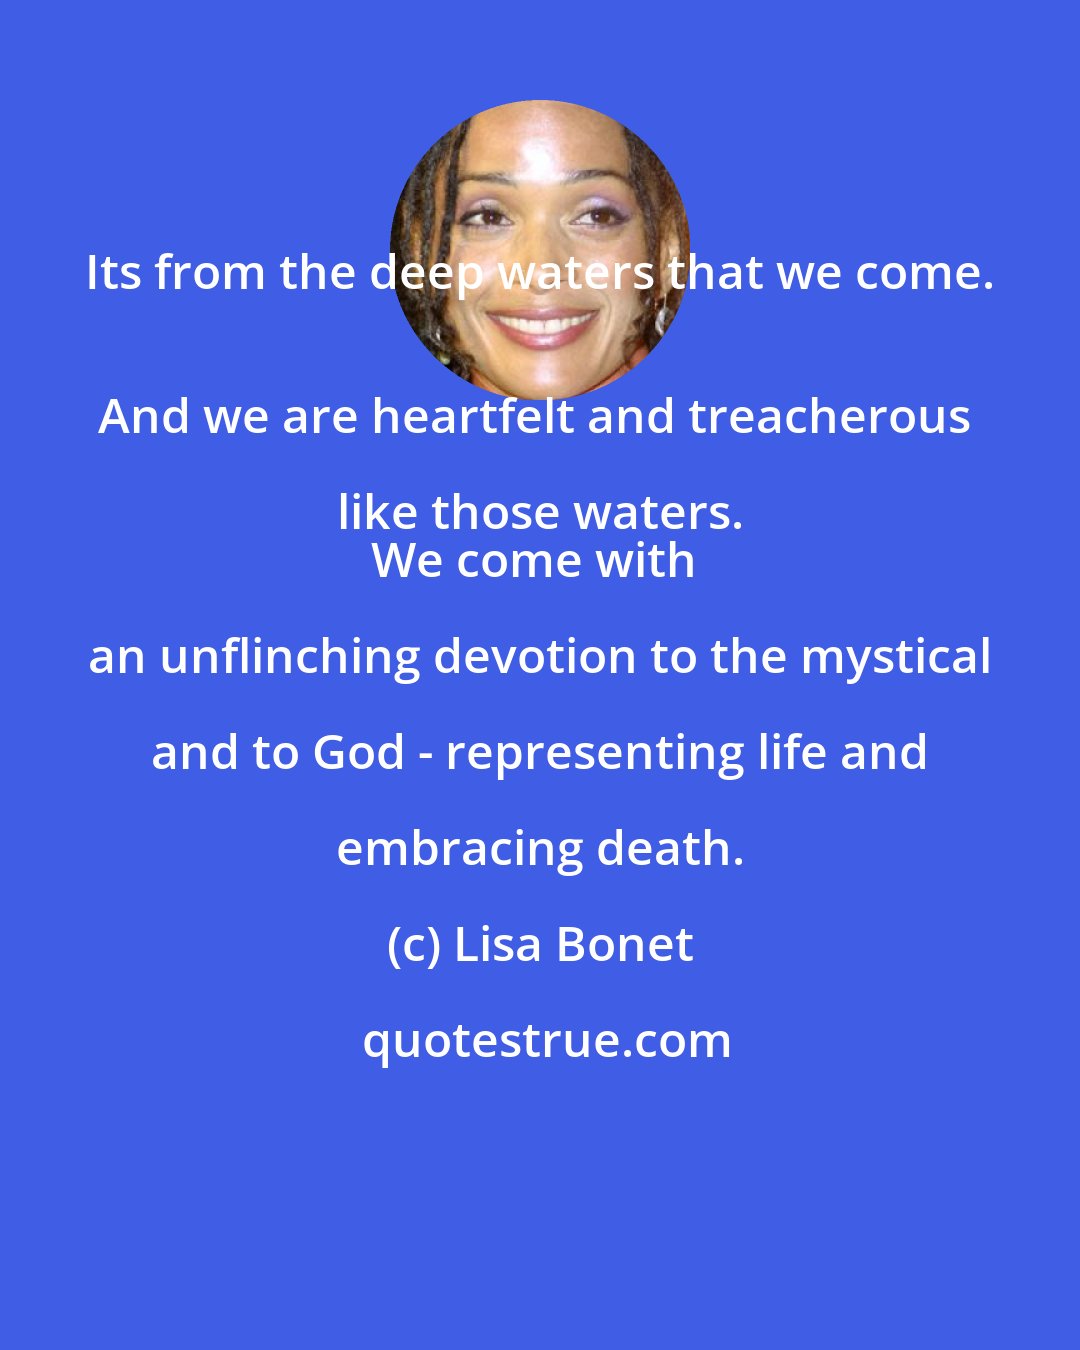 Lisa Bonet: Its from the deep waters that we come. 
And we are heartfelt and treacherous like those waters. 
We come with an unflinching devotion to the mystical and to God - representing life and embracing death.